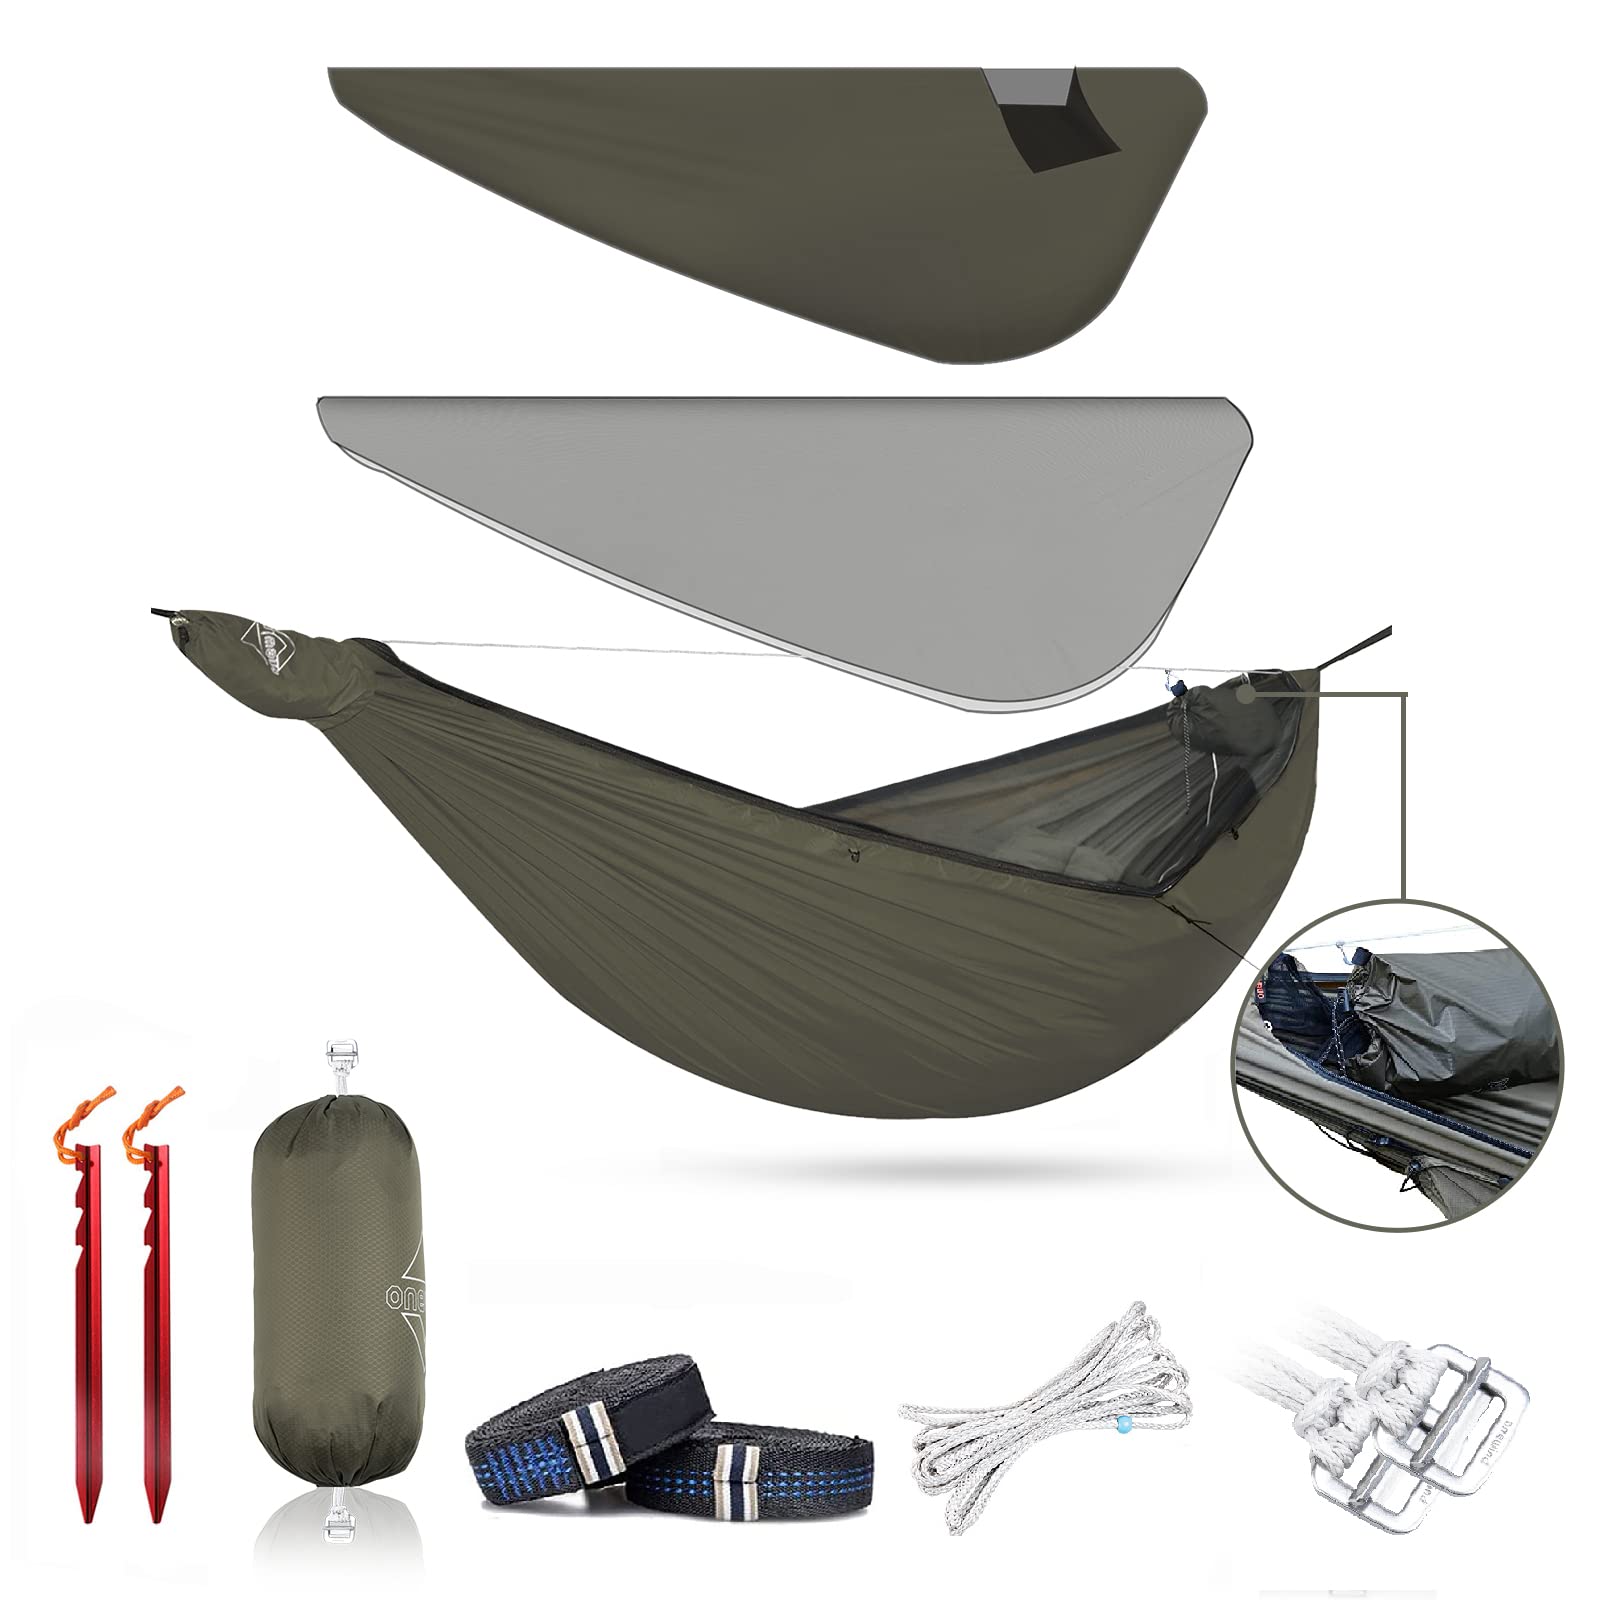 Onewind Airstream Camping Hammock with Mosquito Net and Windsock Lightweight and Convertible Hammock Holds up to 400 lbs I